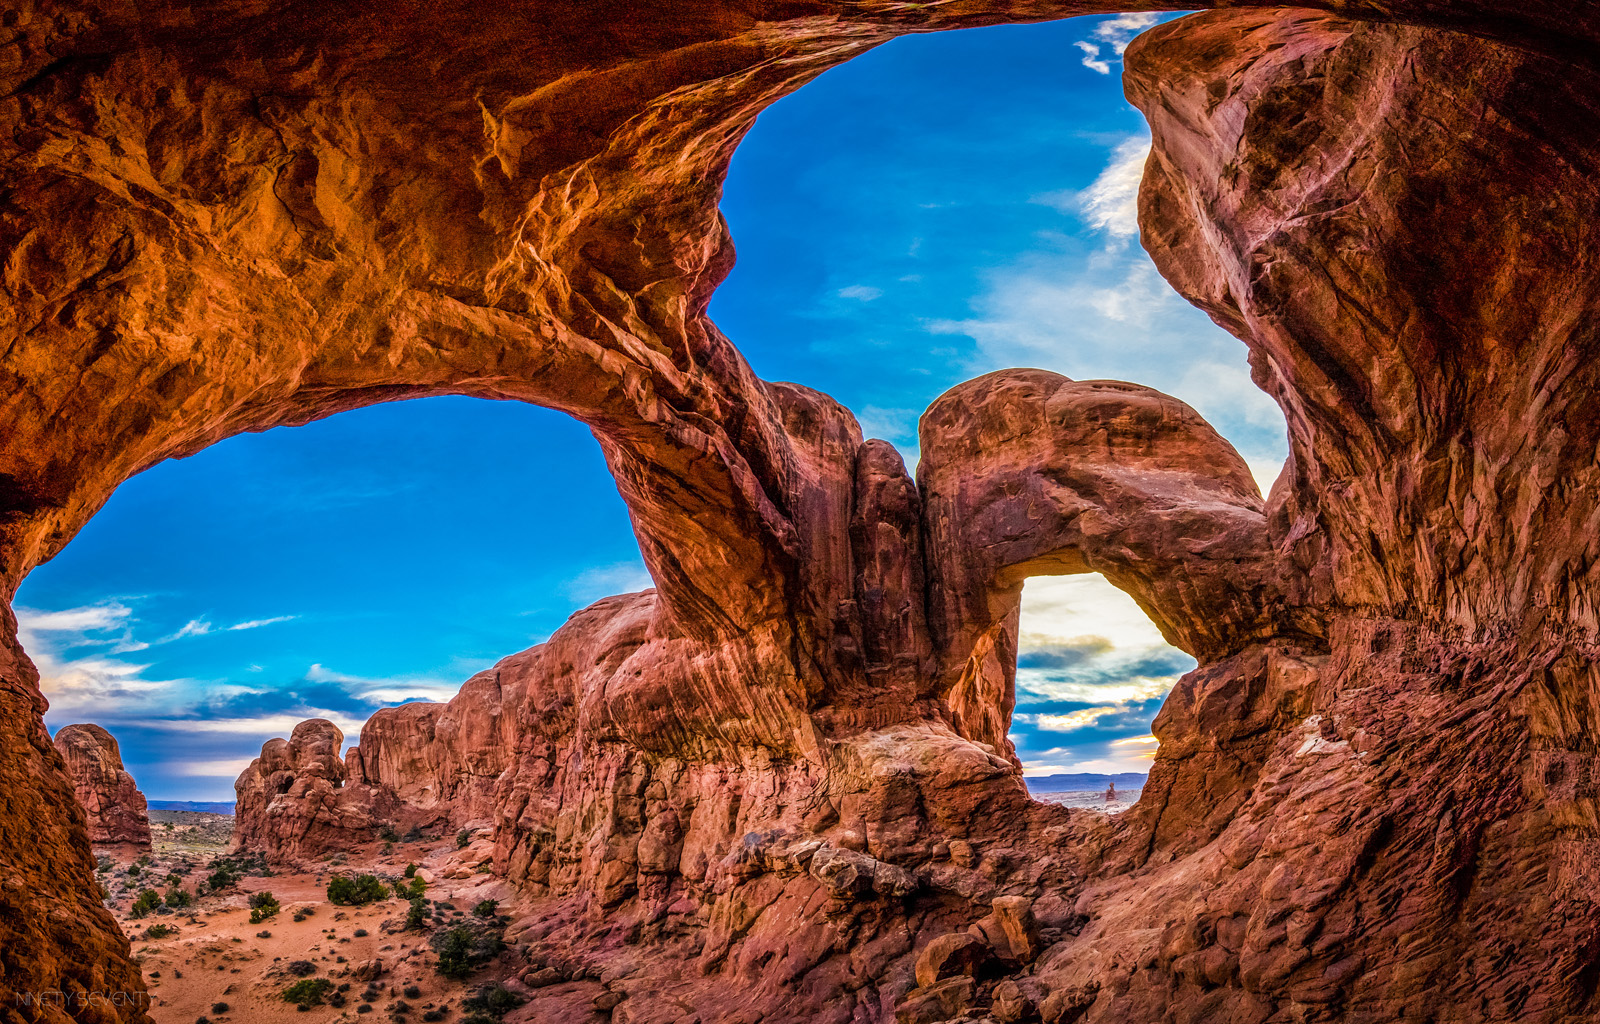 High Resolution Wallpaper | Arches National Park 1600x1024 px